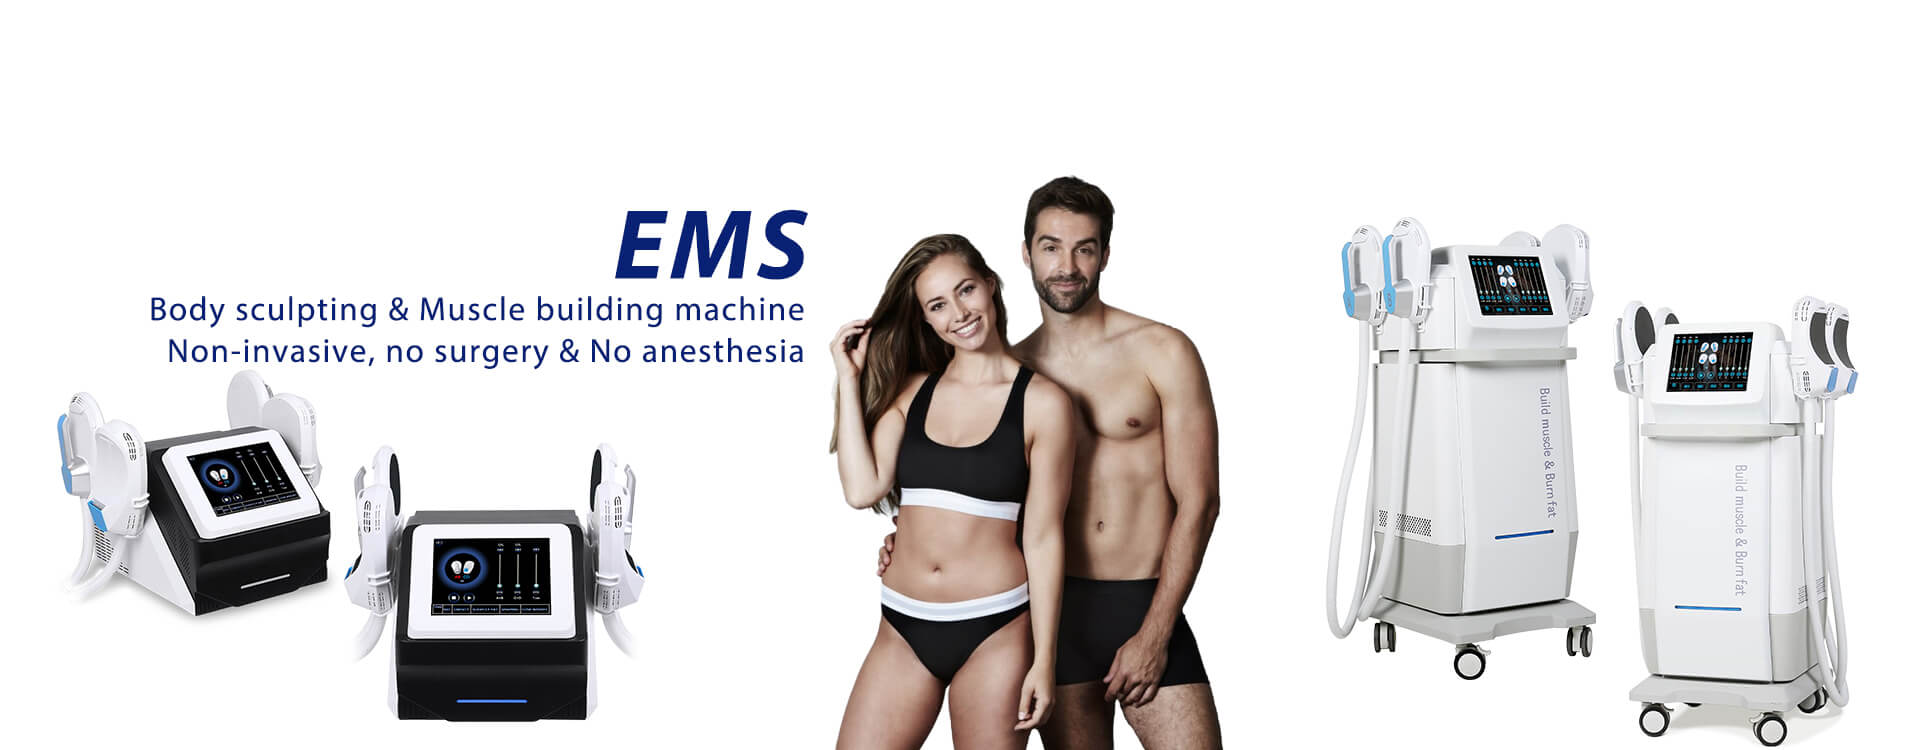 EMS (electronic muscle stimulation) helps tone and define muscles,  providing a more sculpted appearance in areas like the abdomen…